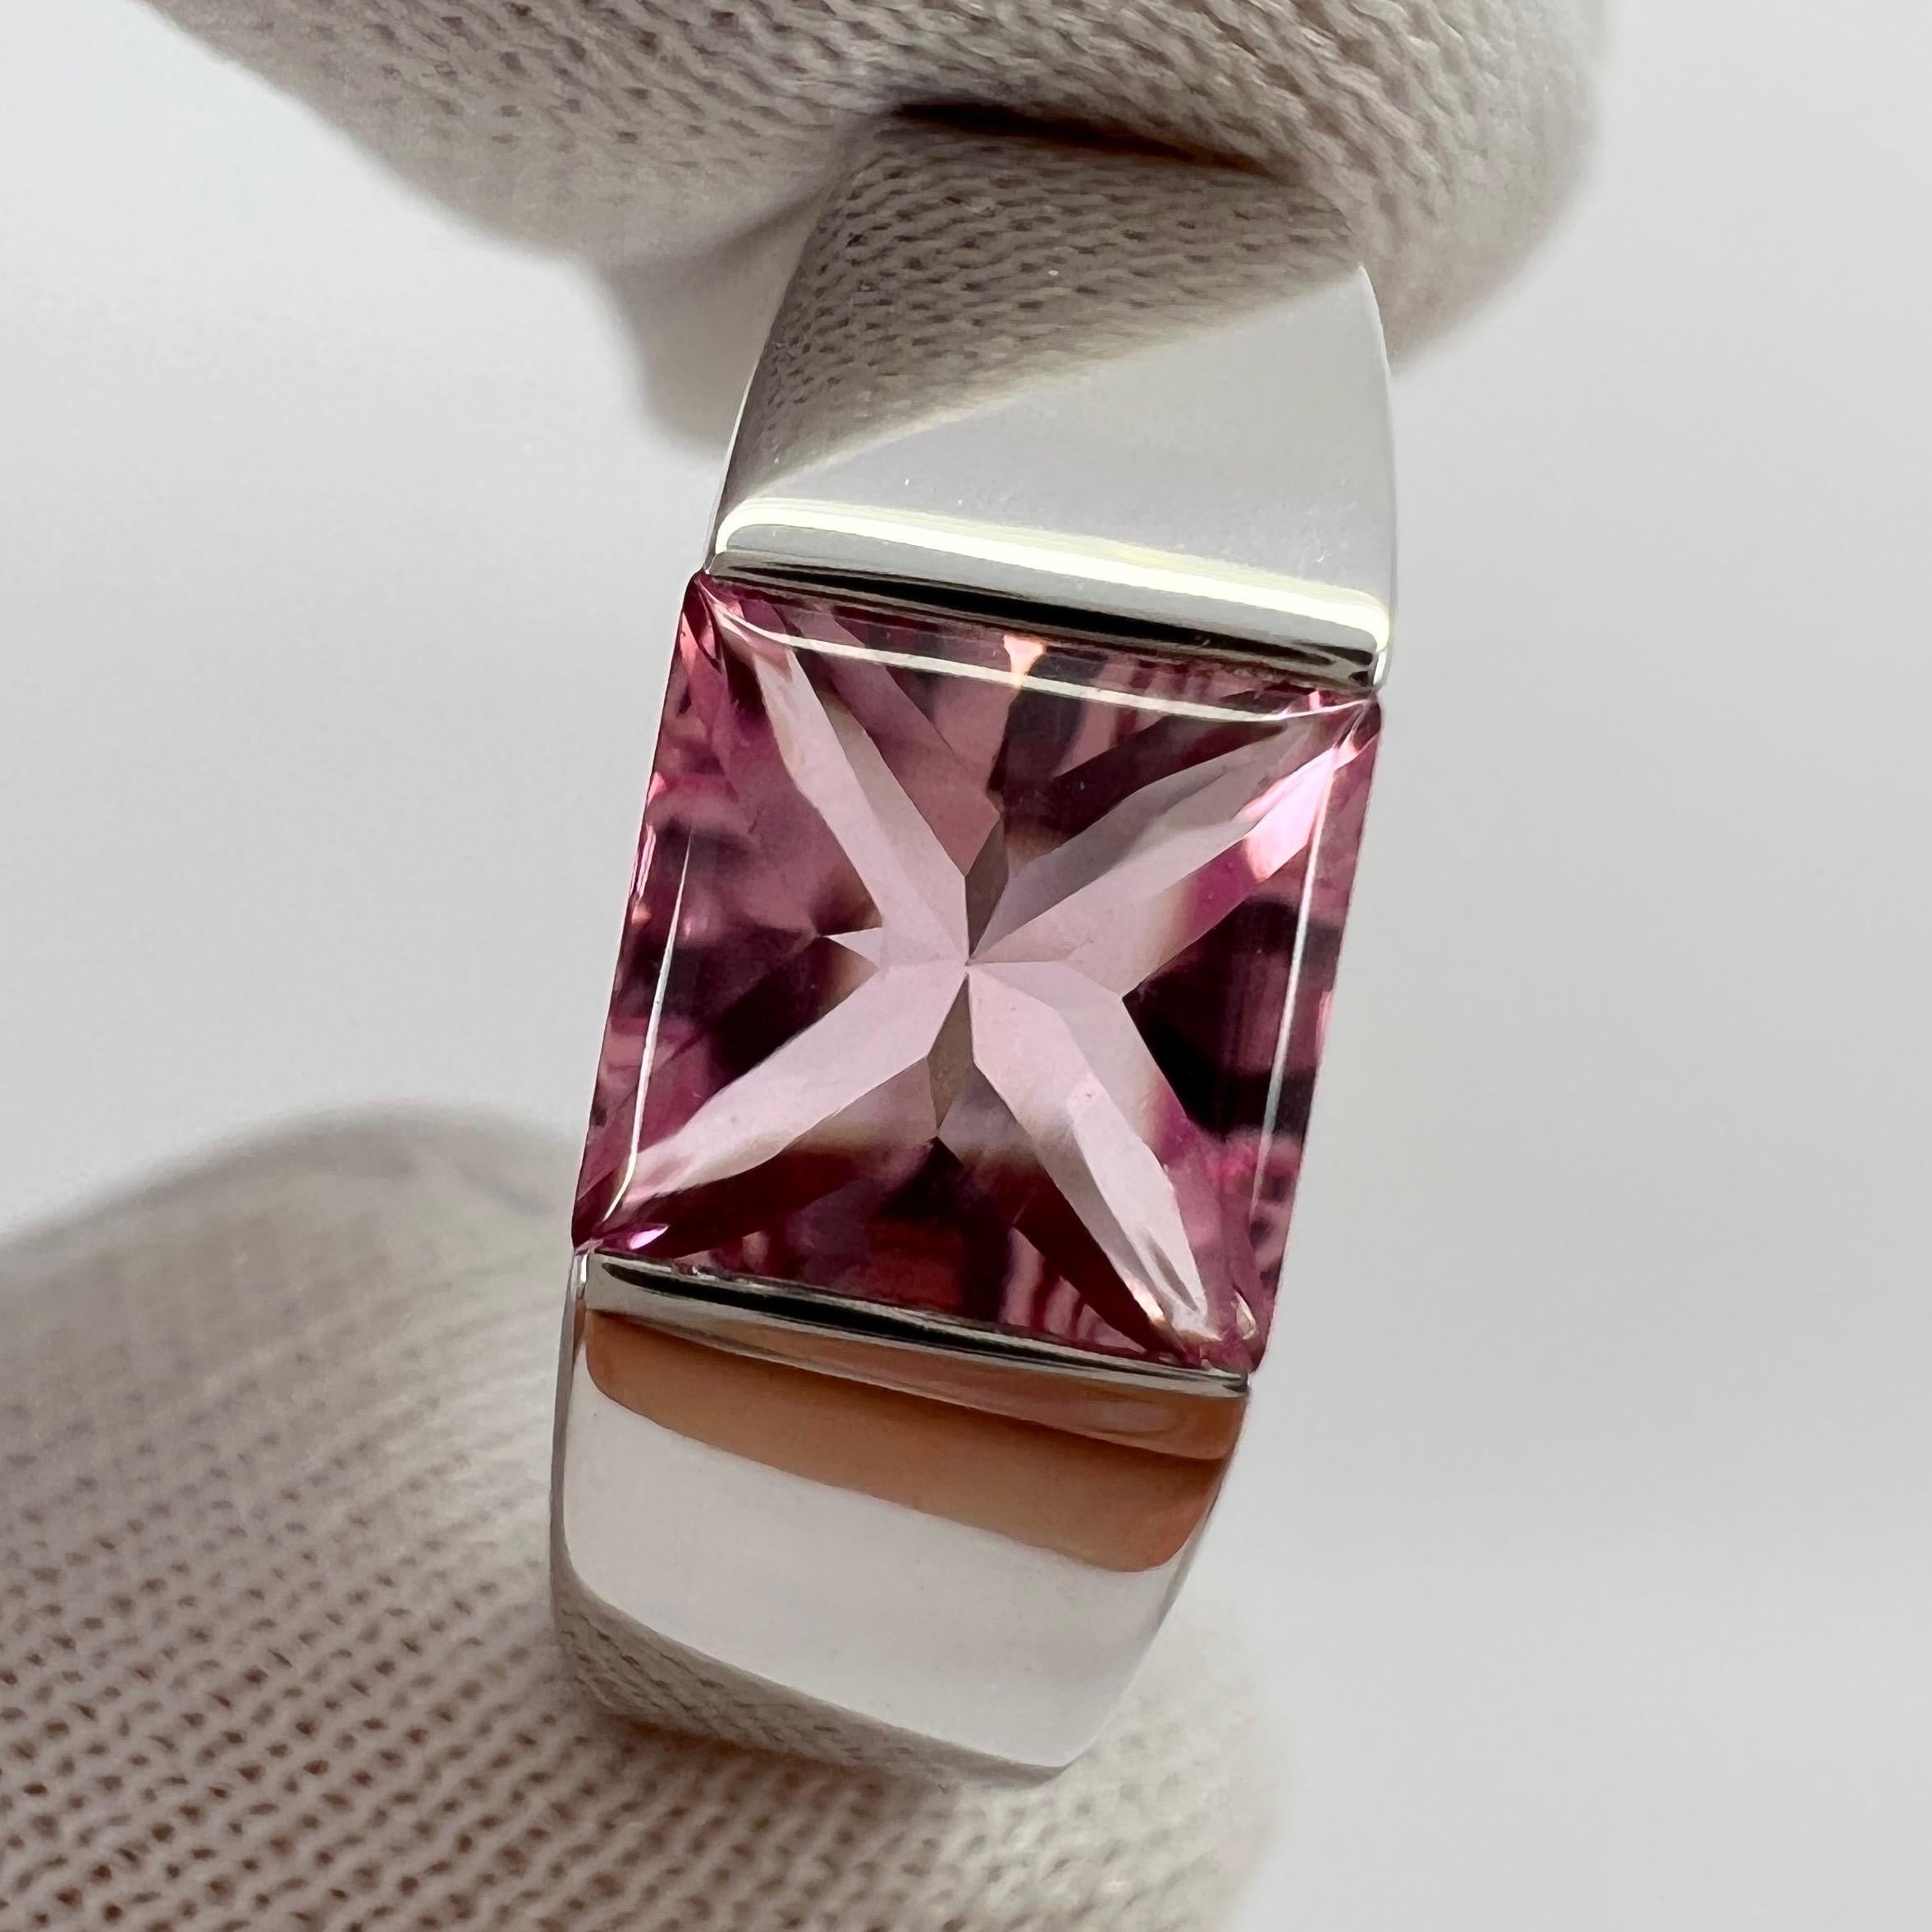 Vintage Cartier Pink Tourmaline 18 Karat White Gold Tank Ring.

Stunning white gold ring with a 5.8mm tension set bright pink fancy-cut tourmaline. Fine jewellery houses like Cartier only use the finest of gemstones and this tourmaline is no